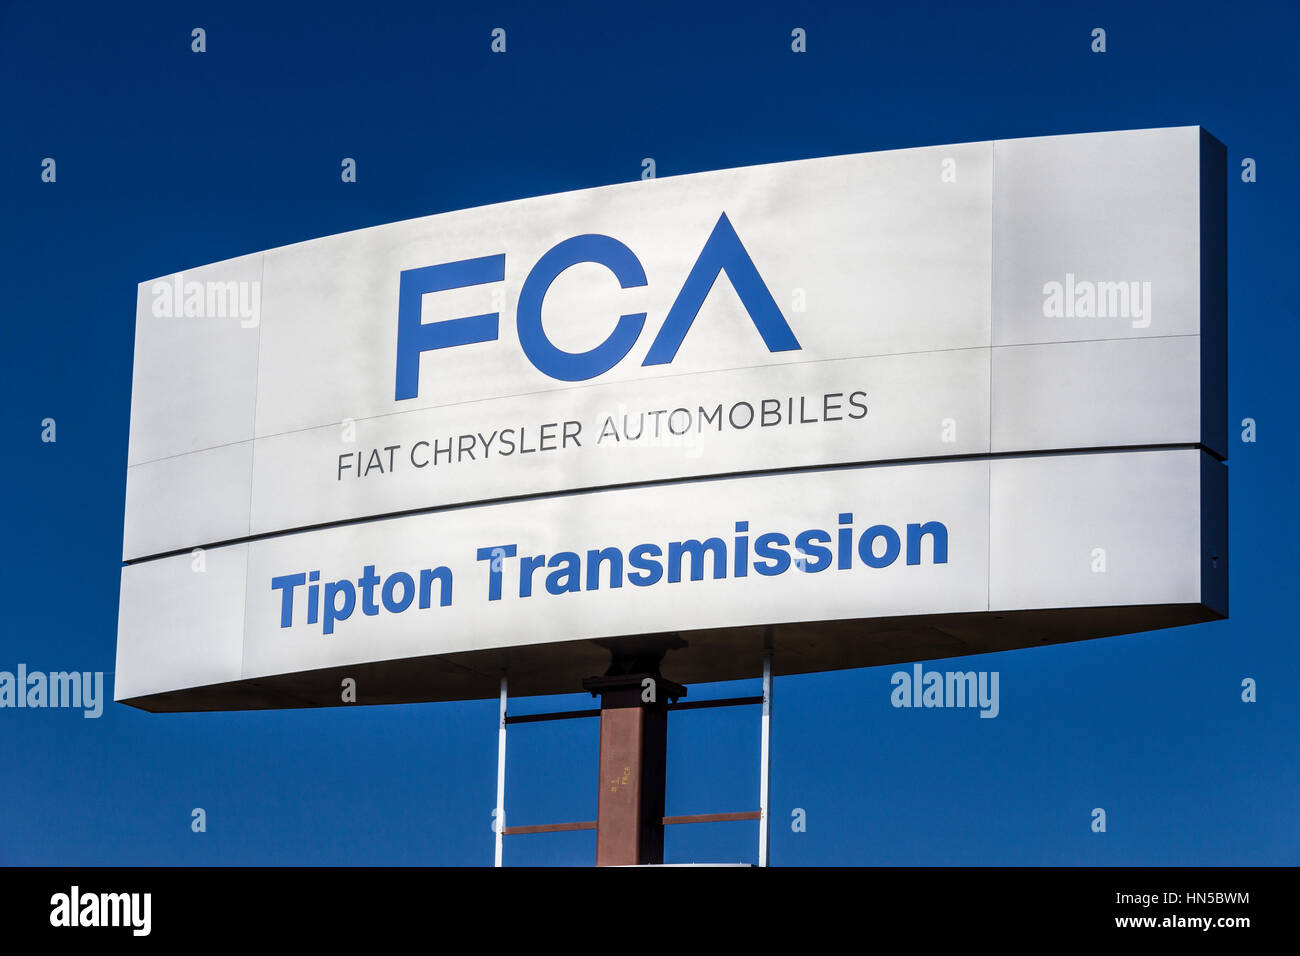 Indianapolis - Circa February 2017: FCA Fiat Chrysler Automobiles Transmission Plant. FCA sells vehicles under the Chrysler, Dodge, and Jeep brands V Stock Photo